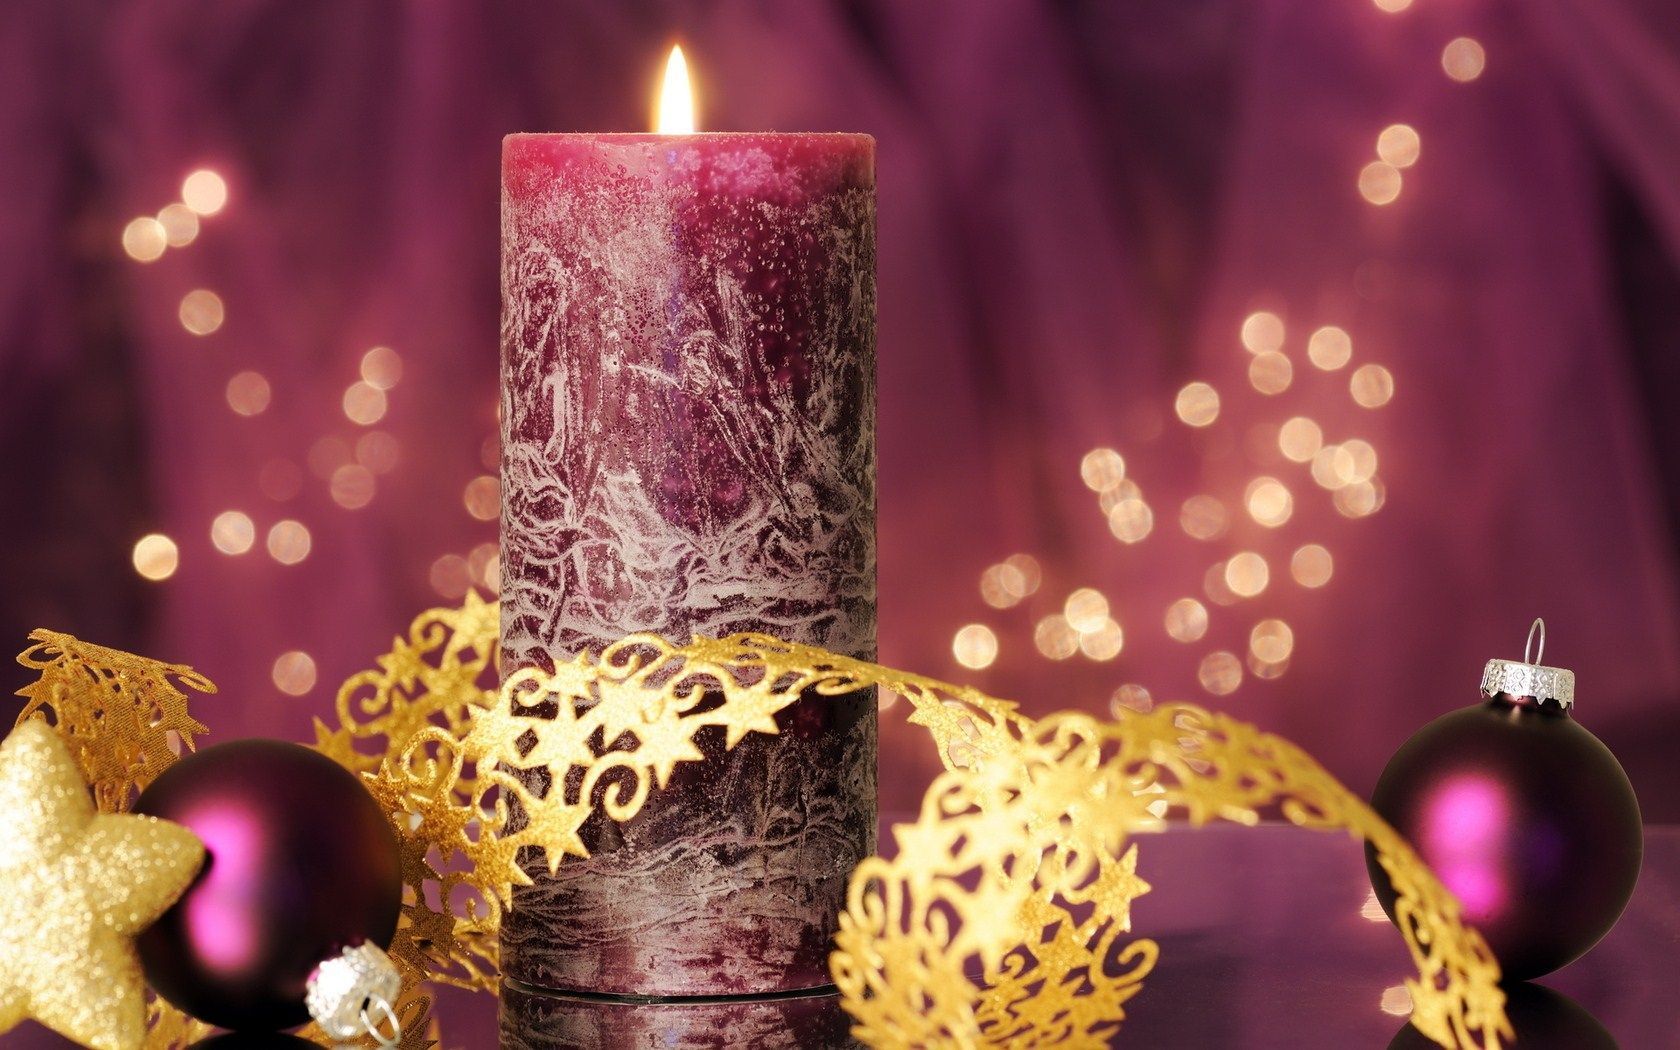 Candle Wallpaper For Computer - Candle Wallpapers Hd , HD Wallpaper & Backgrounds